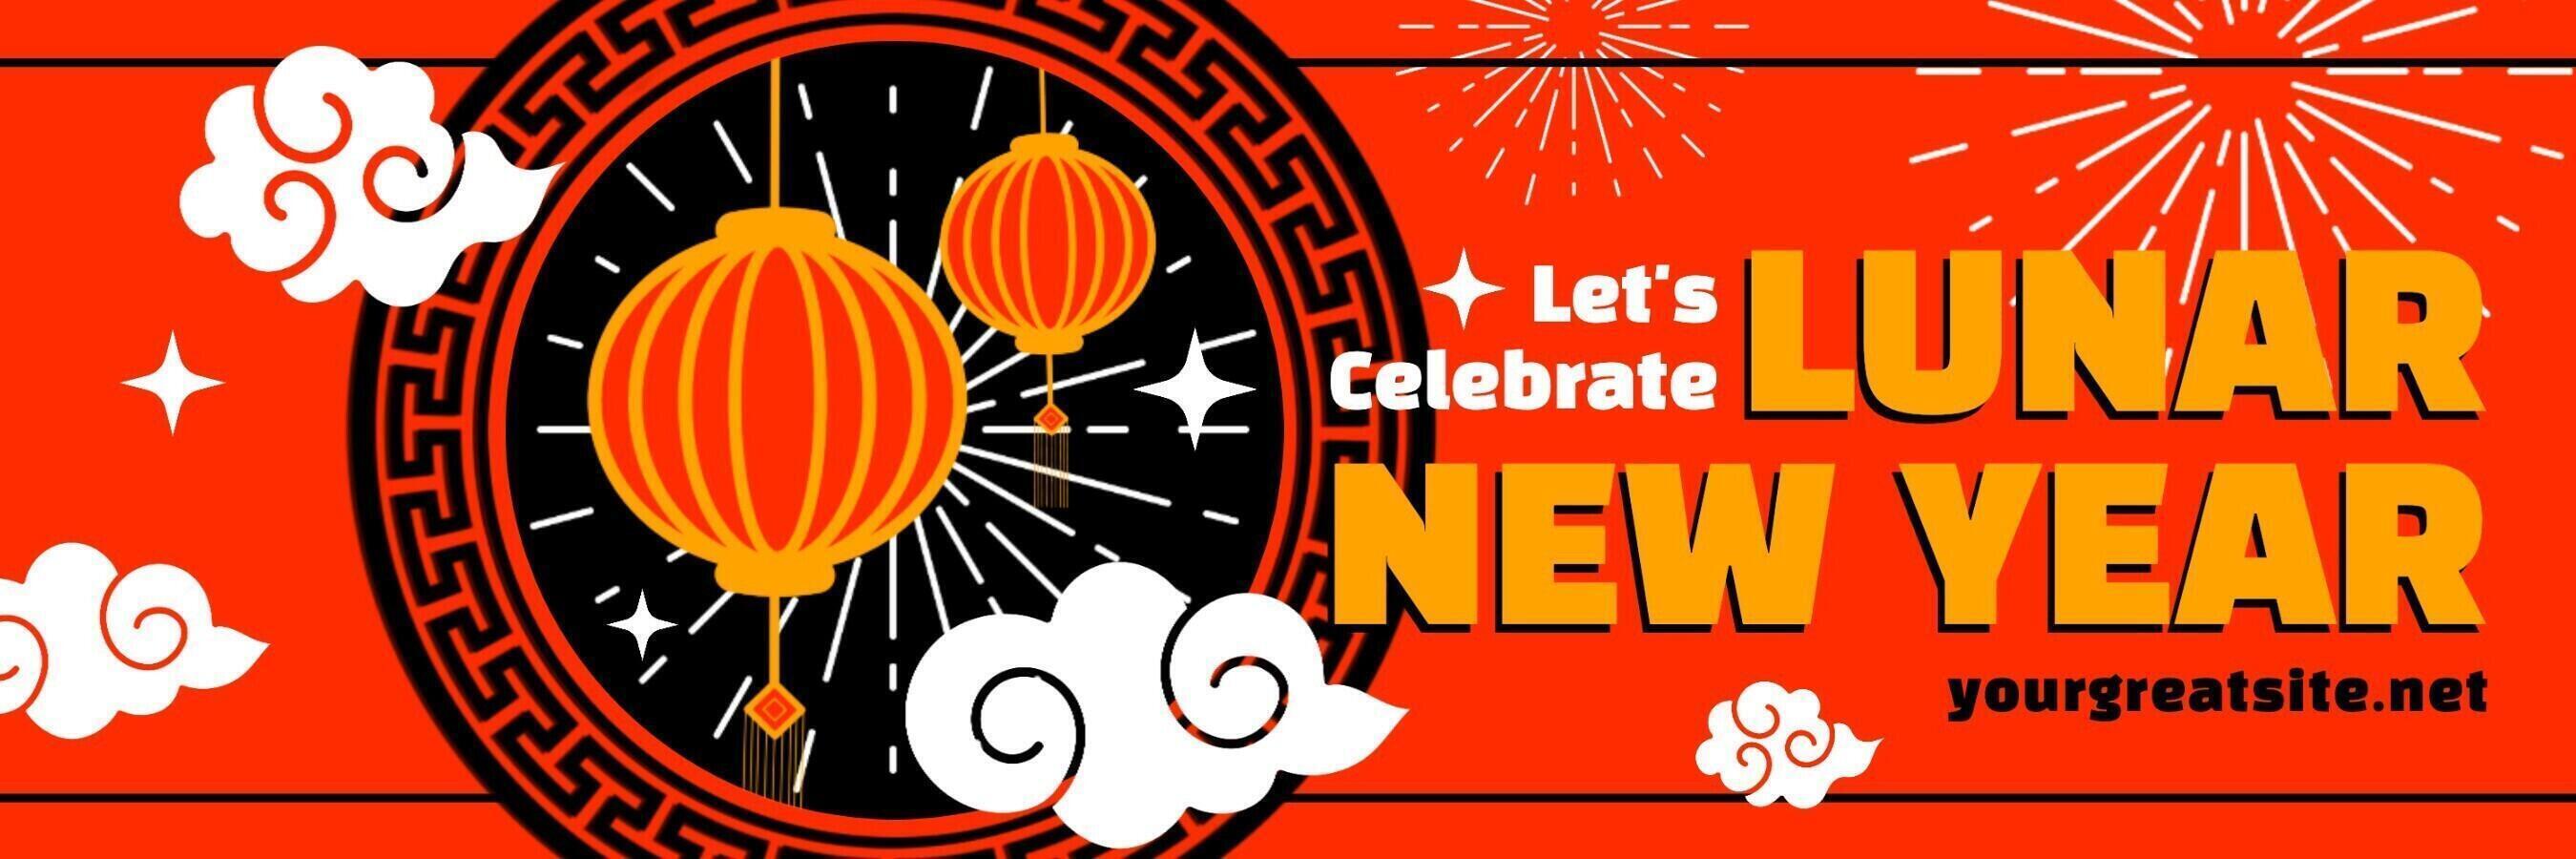 Let's Celebrate Lunar New Year Template for Twitter Header